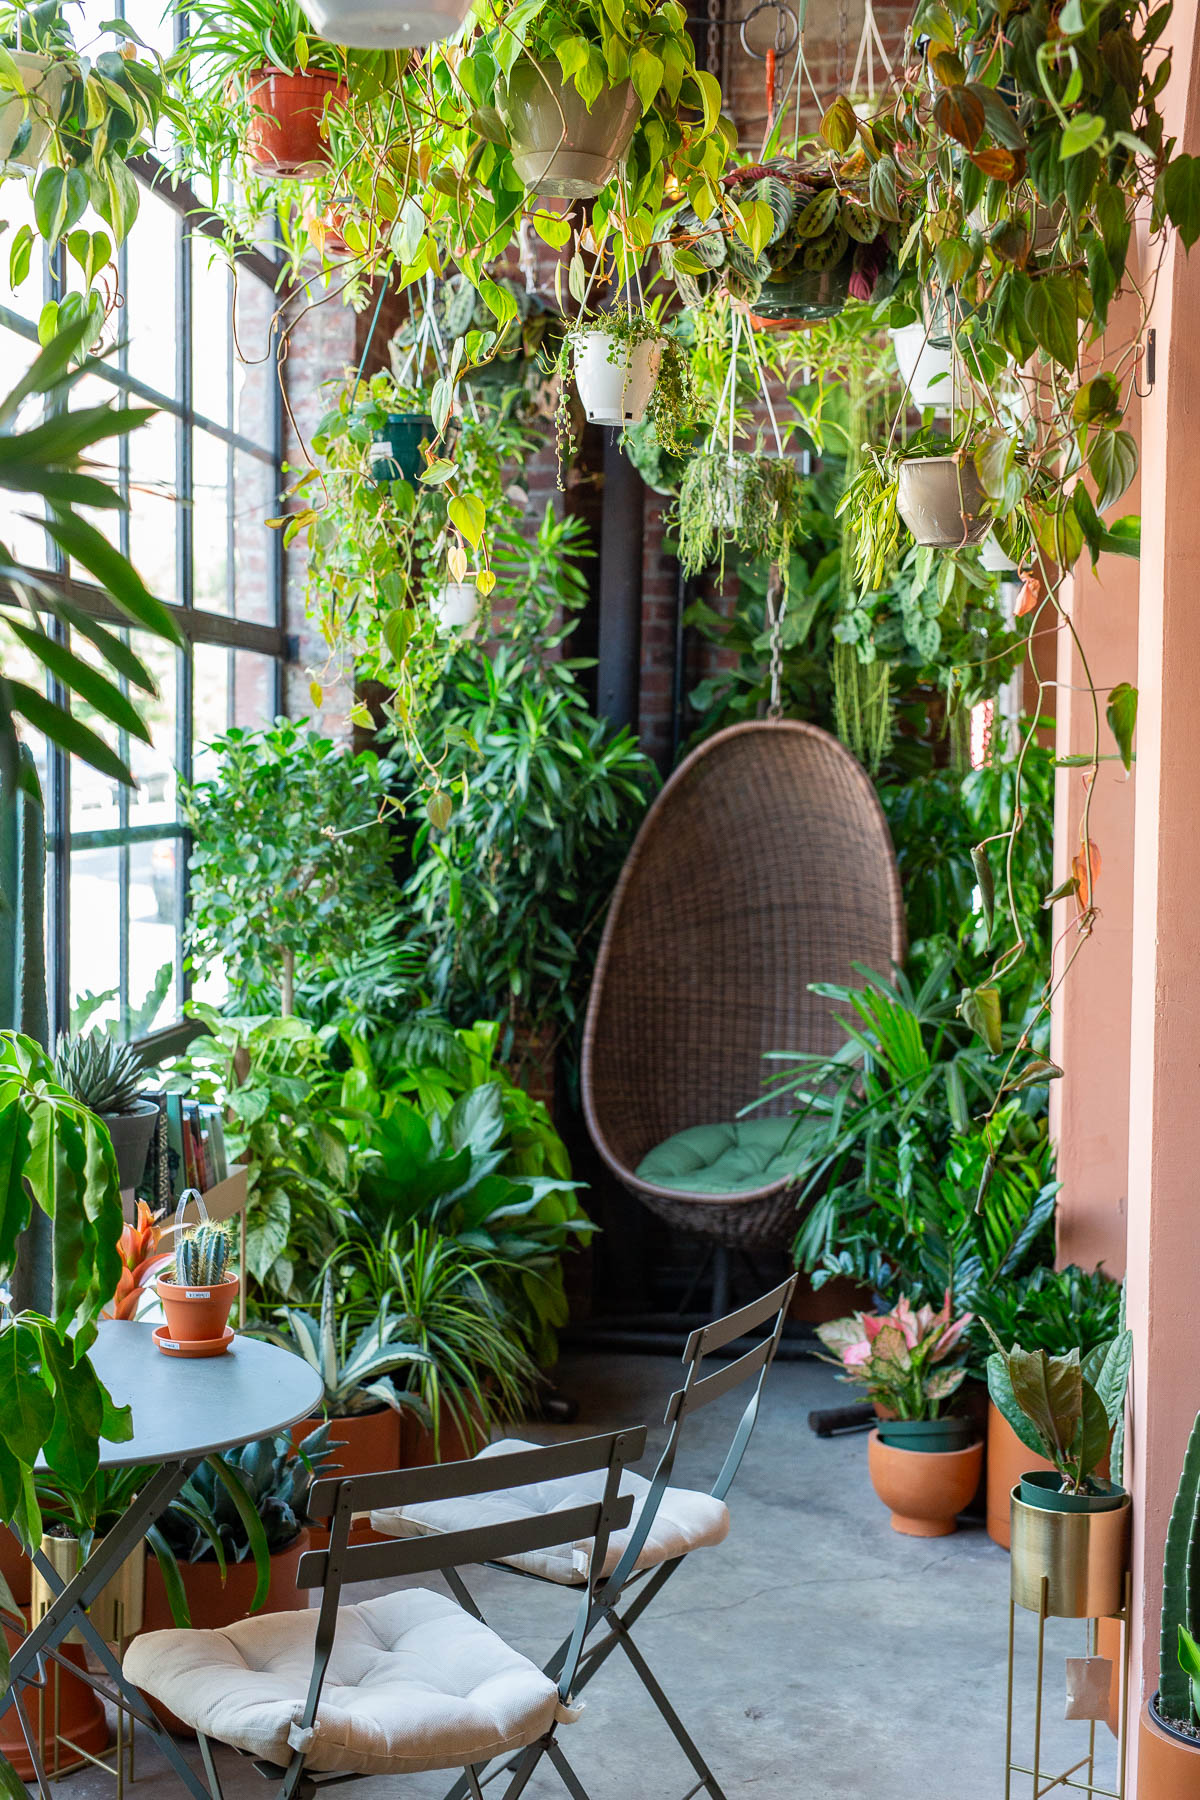 Greenery Unlimited in Greenpoint, Brooklyn, Best plant stores in NYC